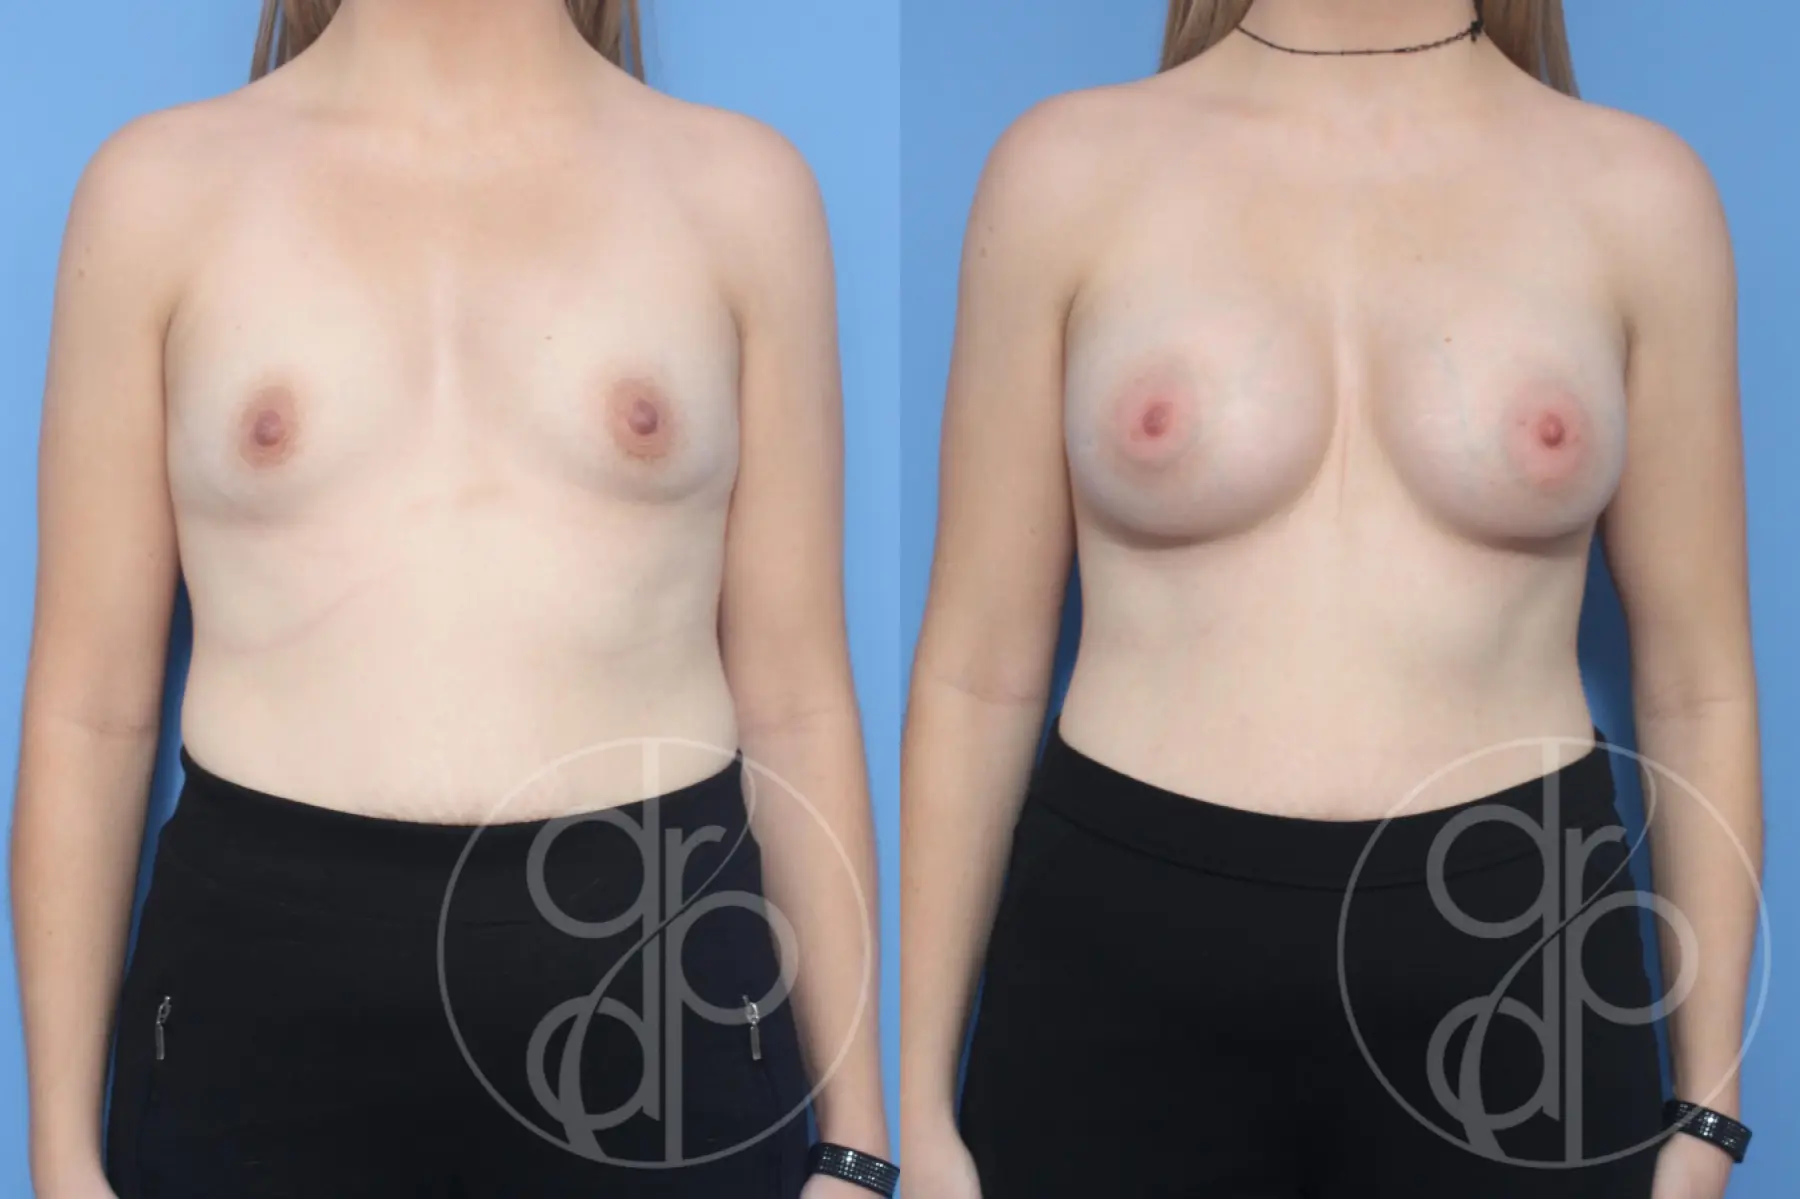 patient 13235 breast augmentation before and after result - Before and After 1